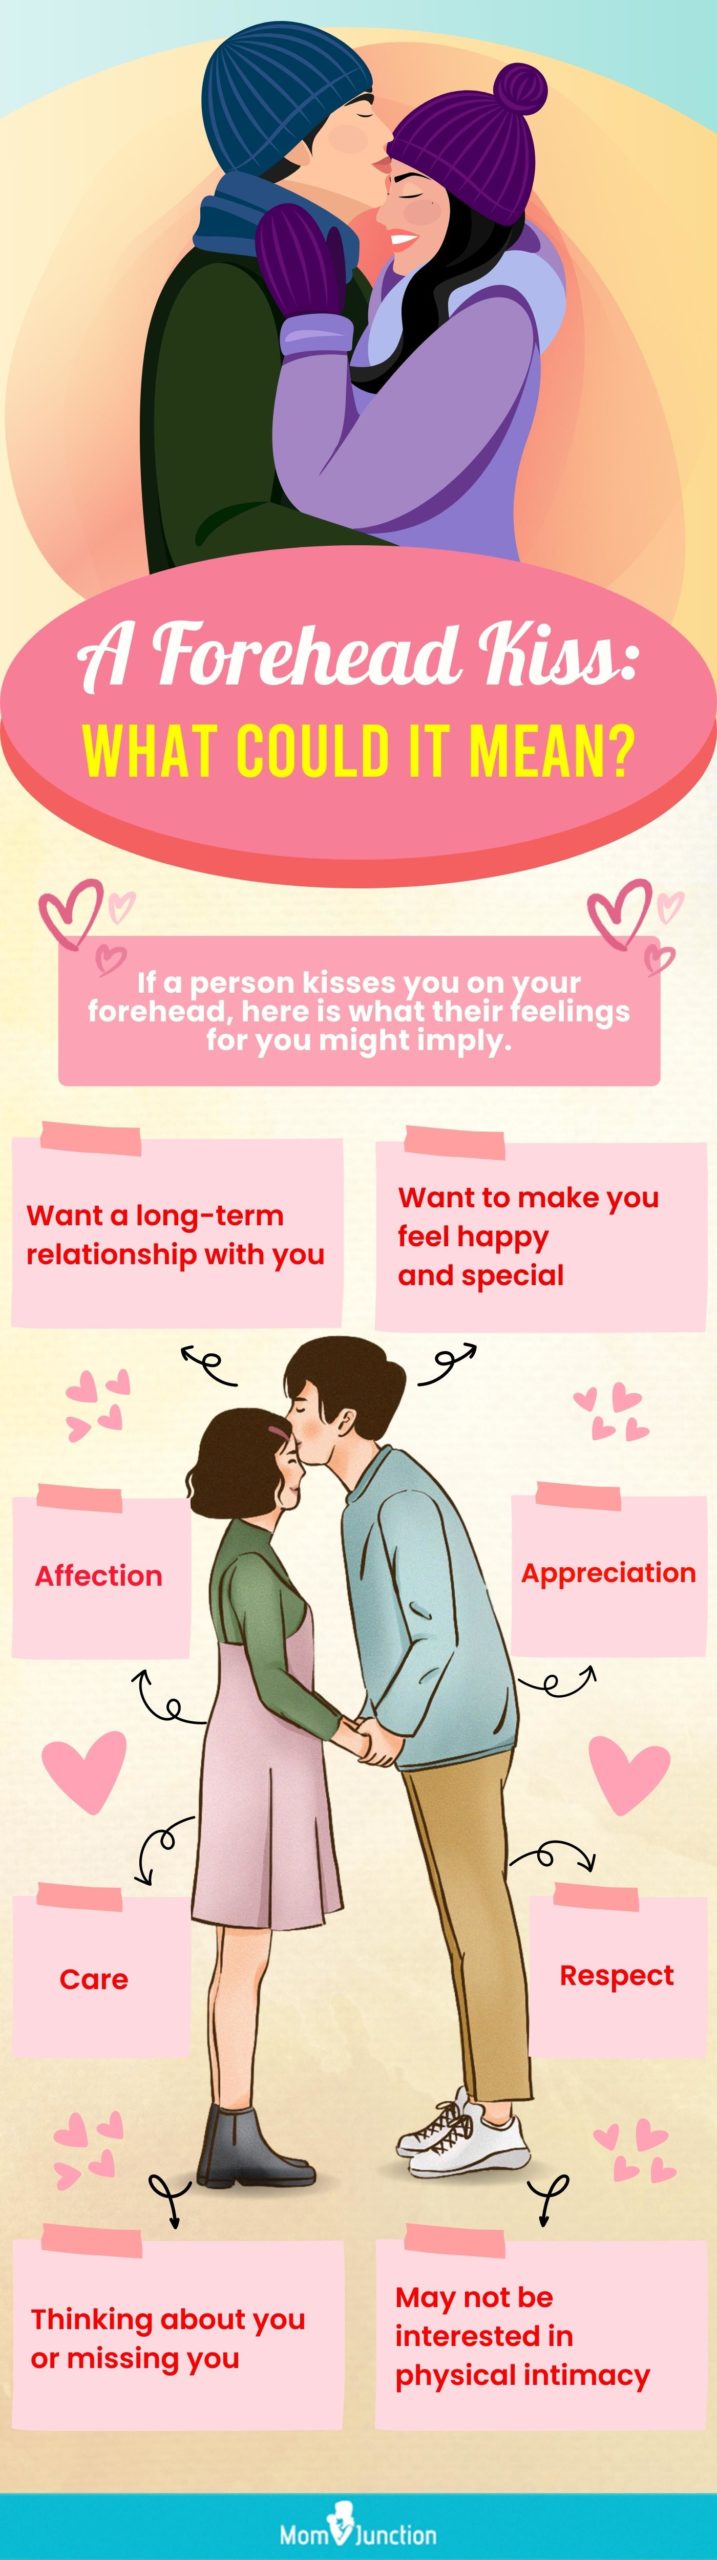 a forehead kiss what could it mean (infographic)